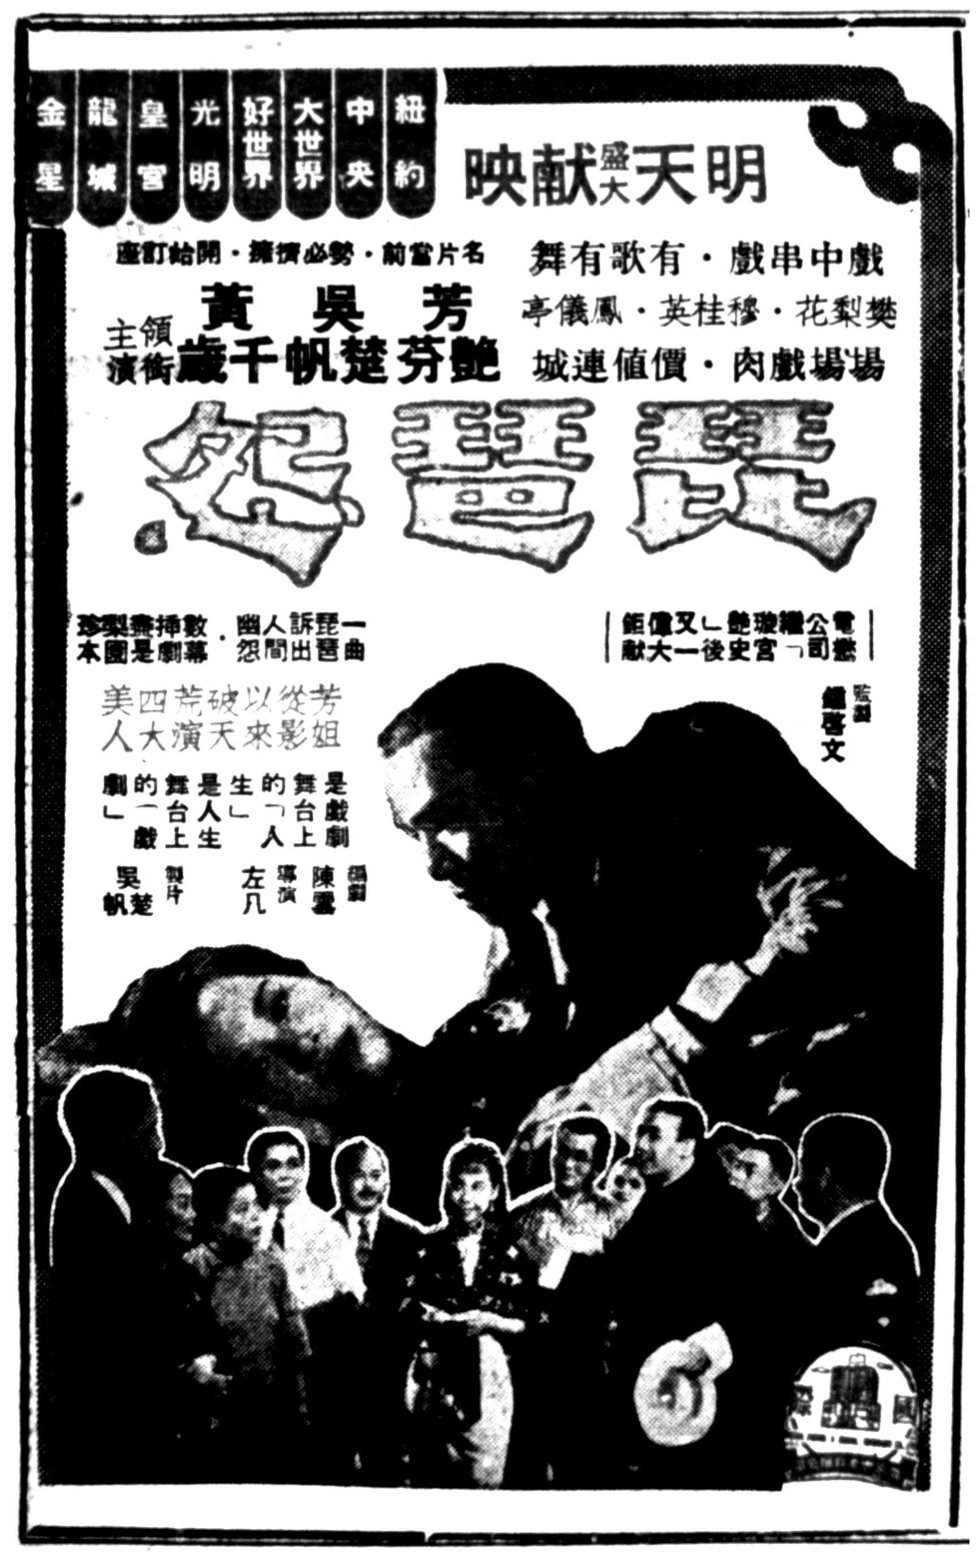 Re-approaching a Hollywood Film Musical through 1950s Hong Kong Newspaper Advertisements